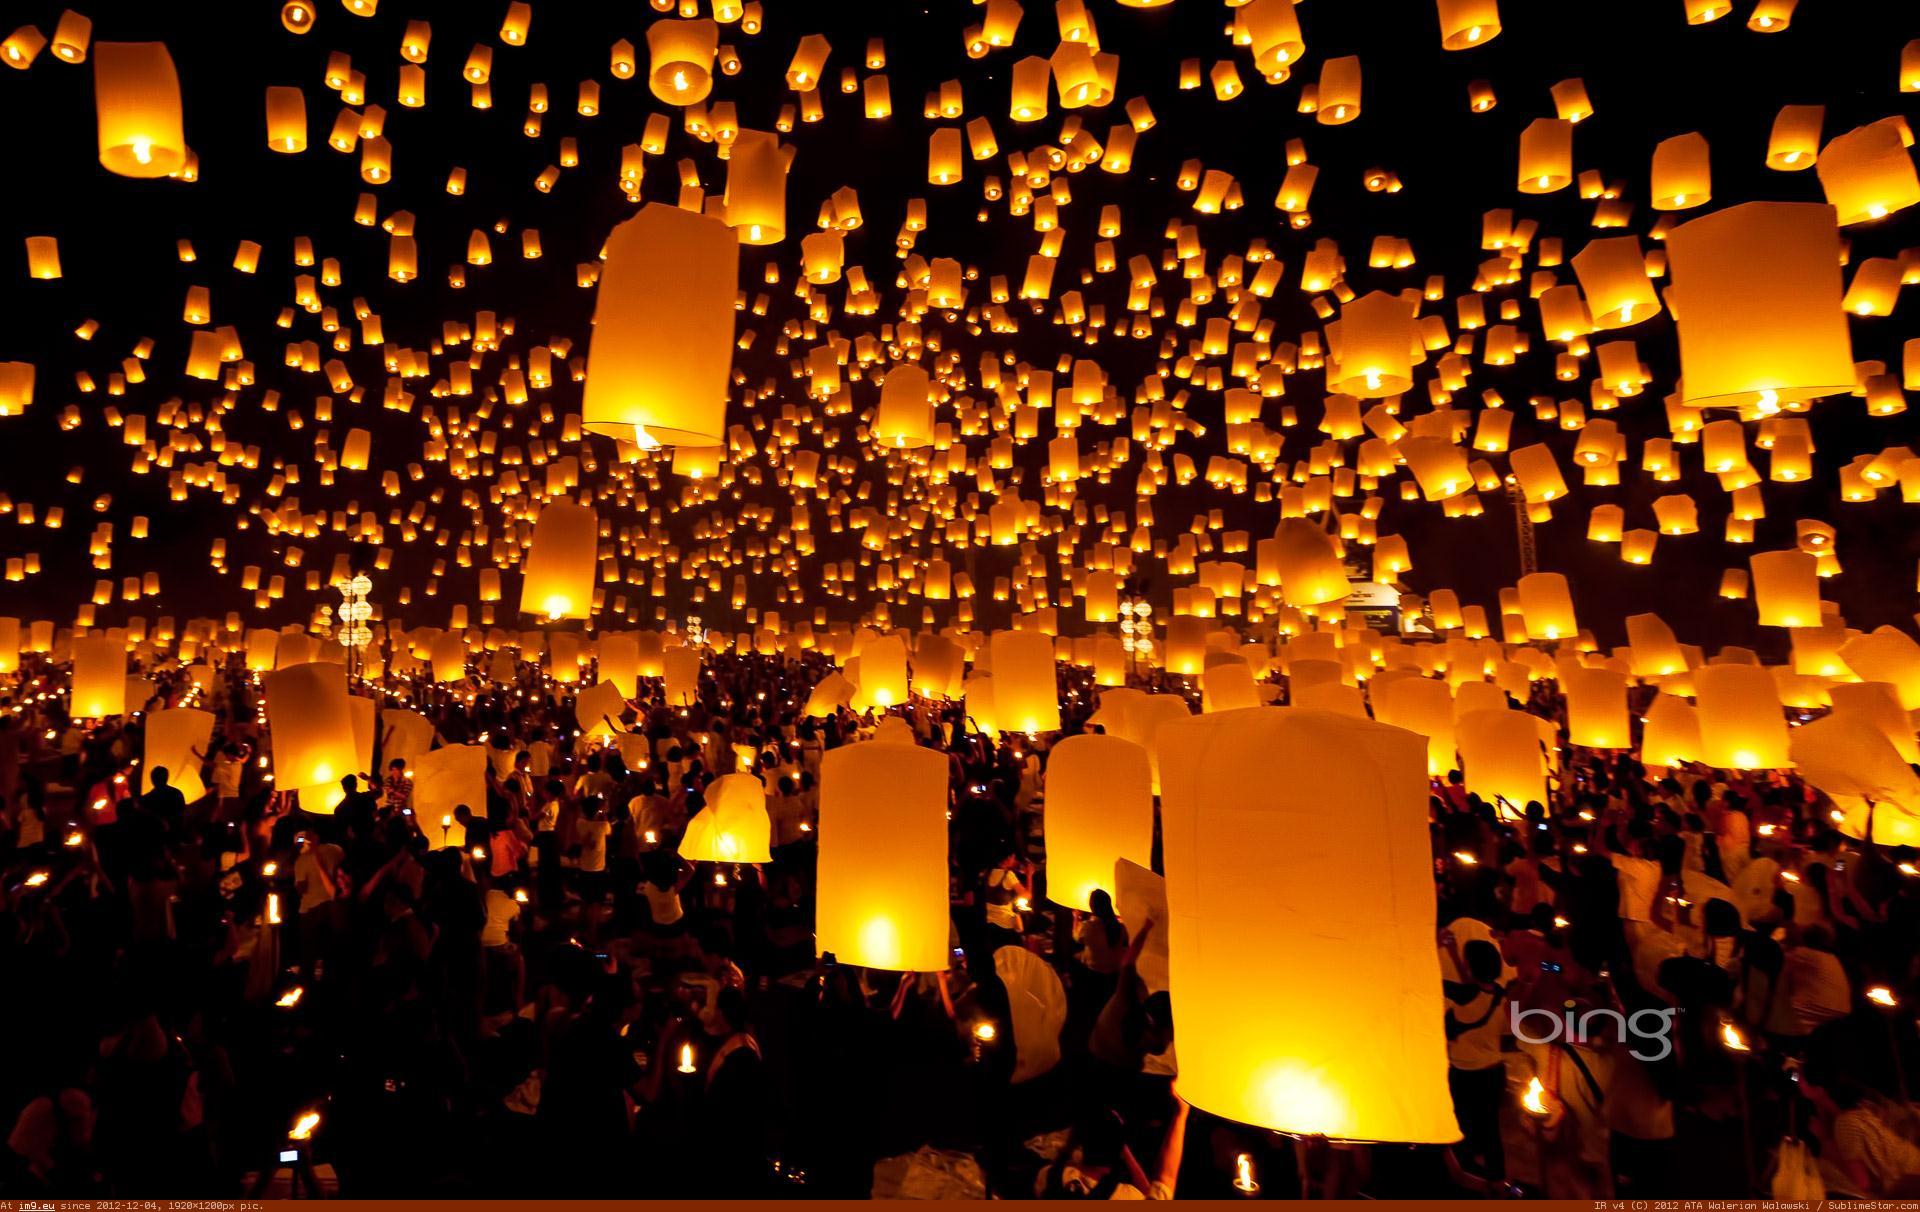 Lanterns released into sky during a festival, Chiang Mai province, Thailand (in Bing Photos November 2012)